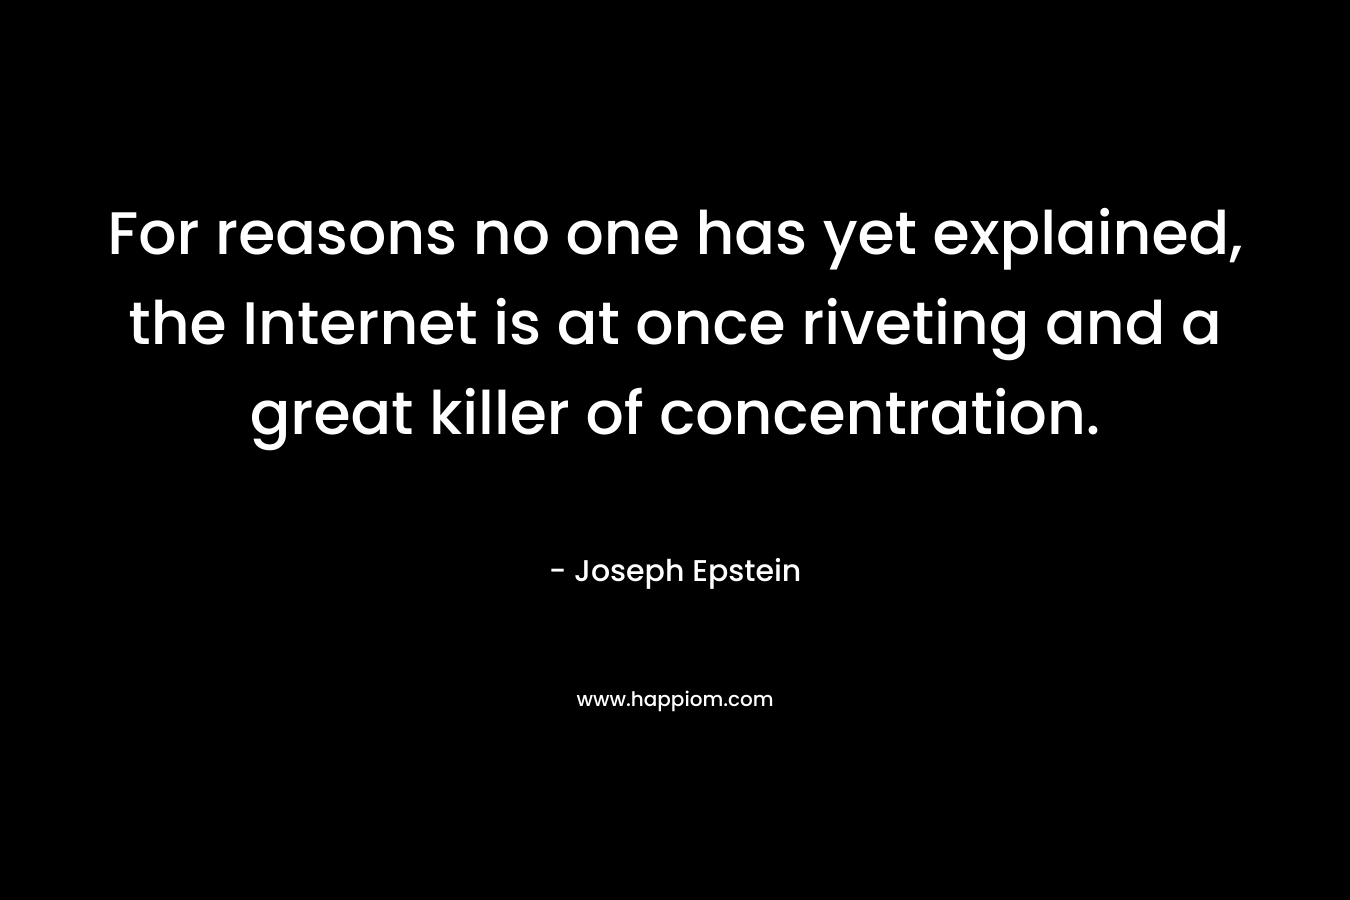 For reasons no one has yet explained, the Internet is at once riveting and a great killer of concentration. – Joseph Epstein